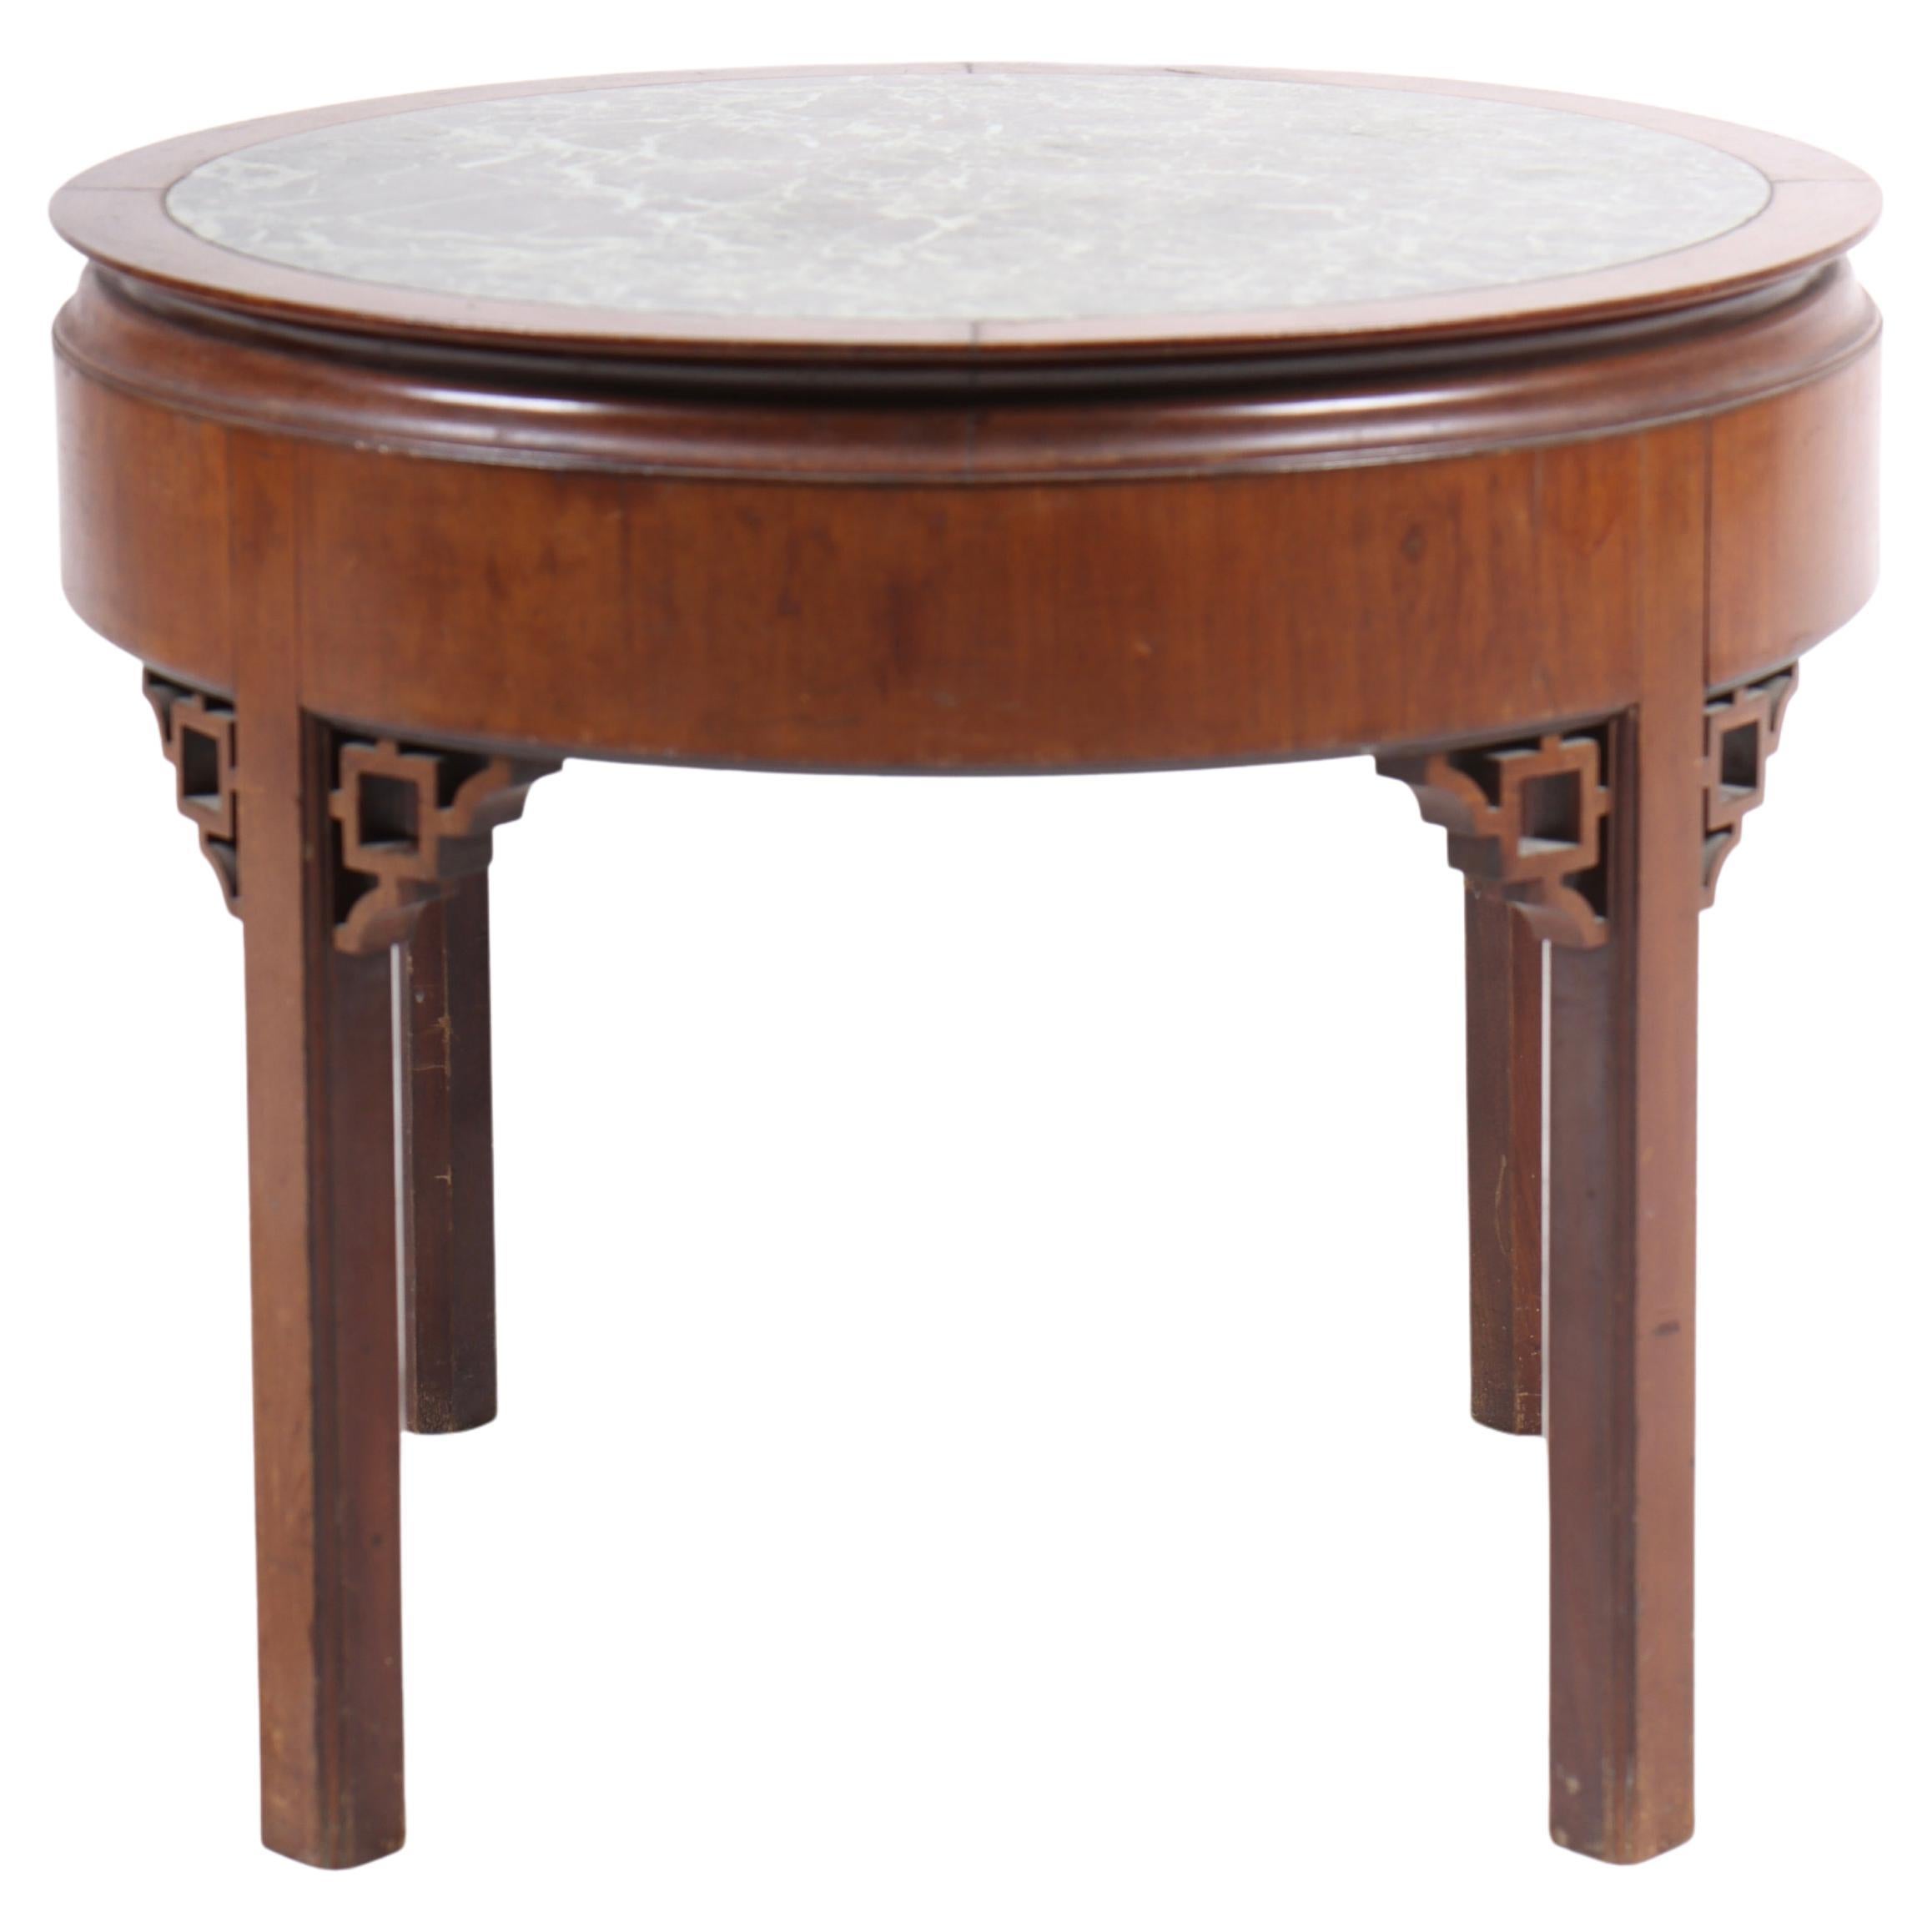 Low Table in Mahogany and Marble, Made in Denmark 1930s